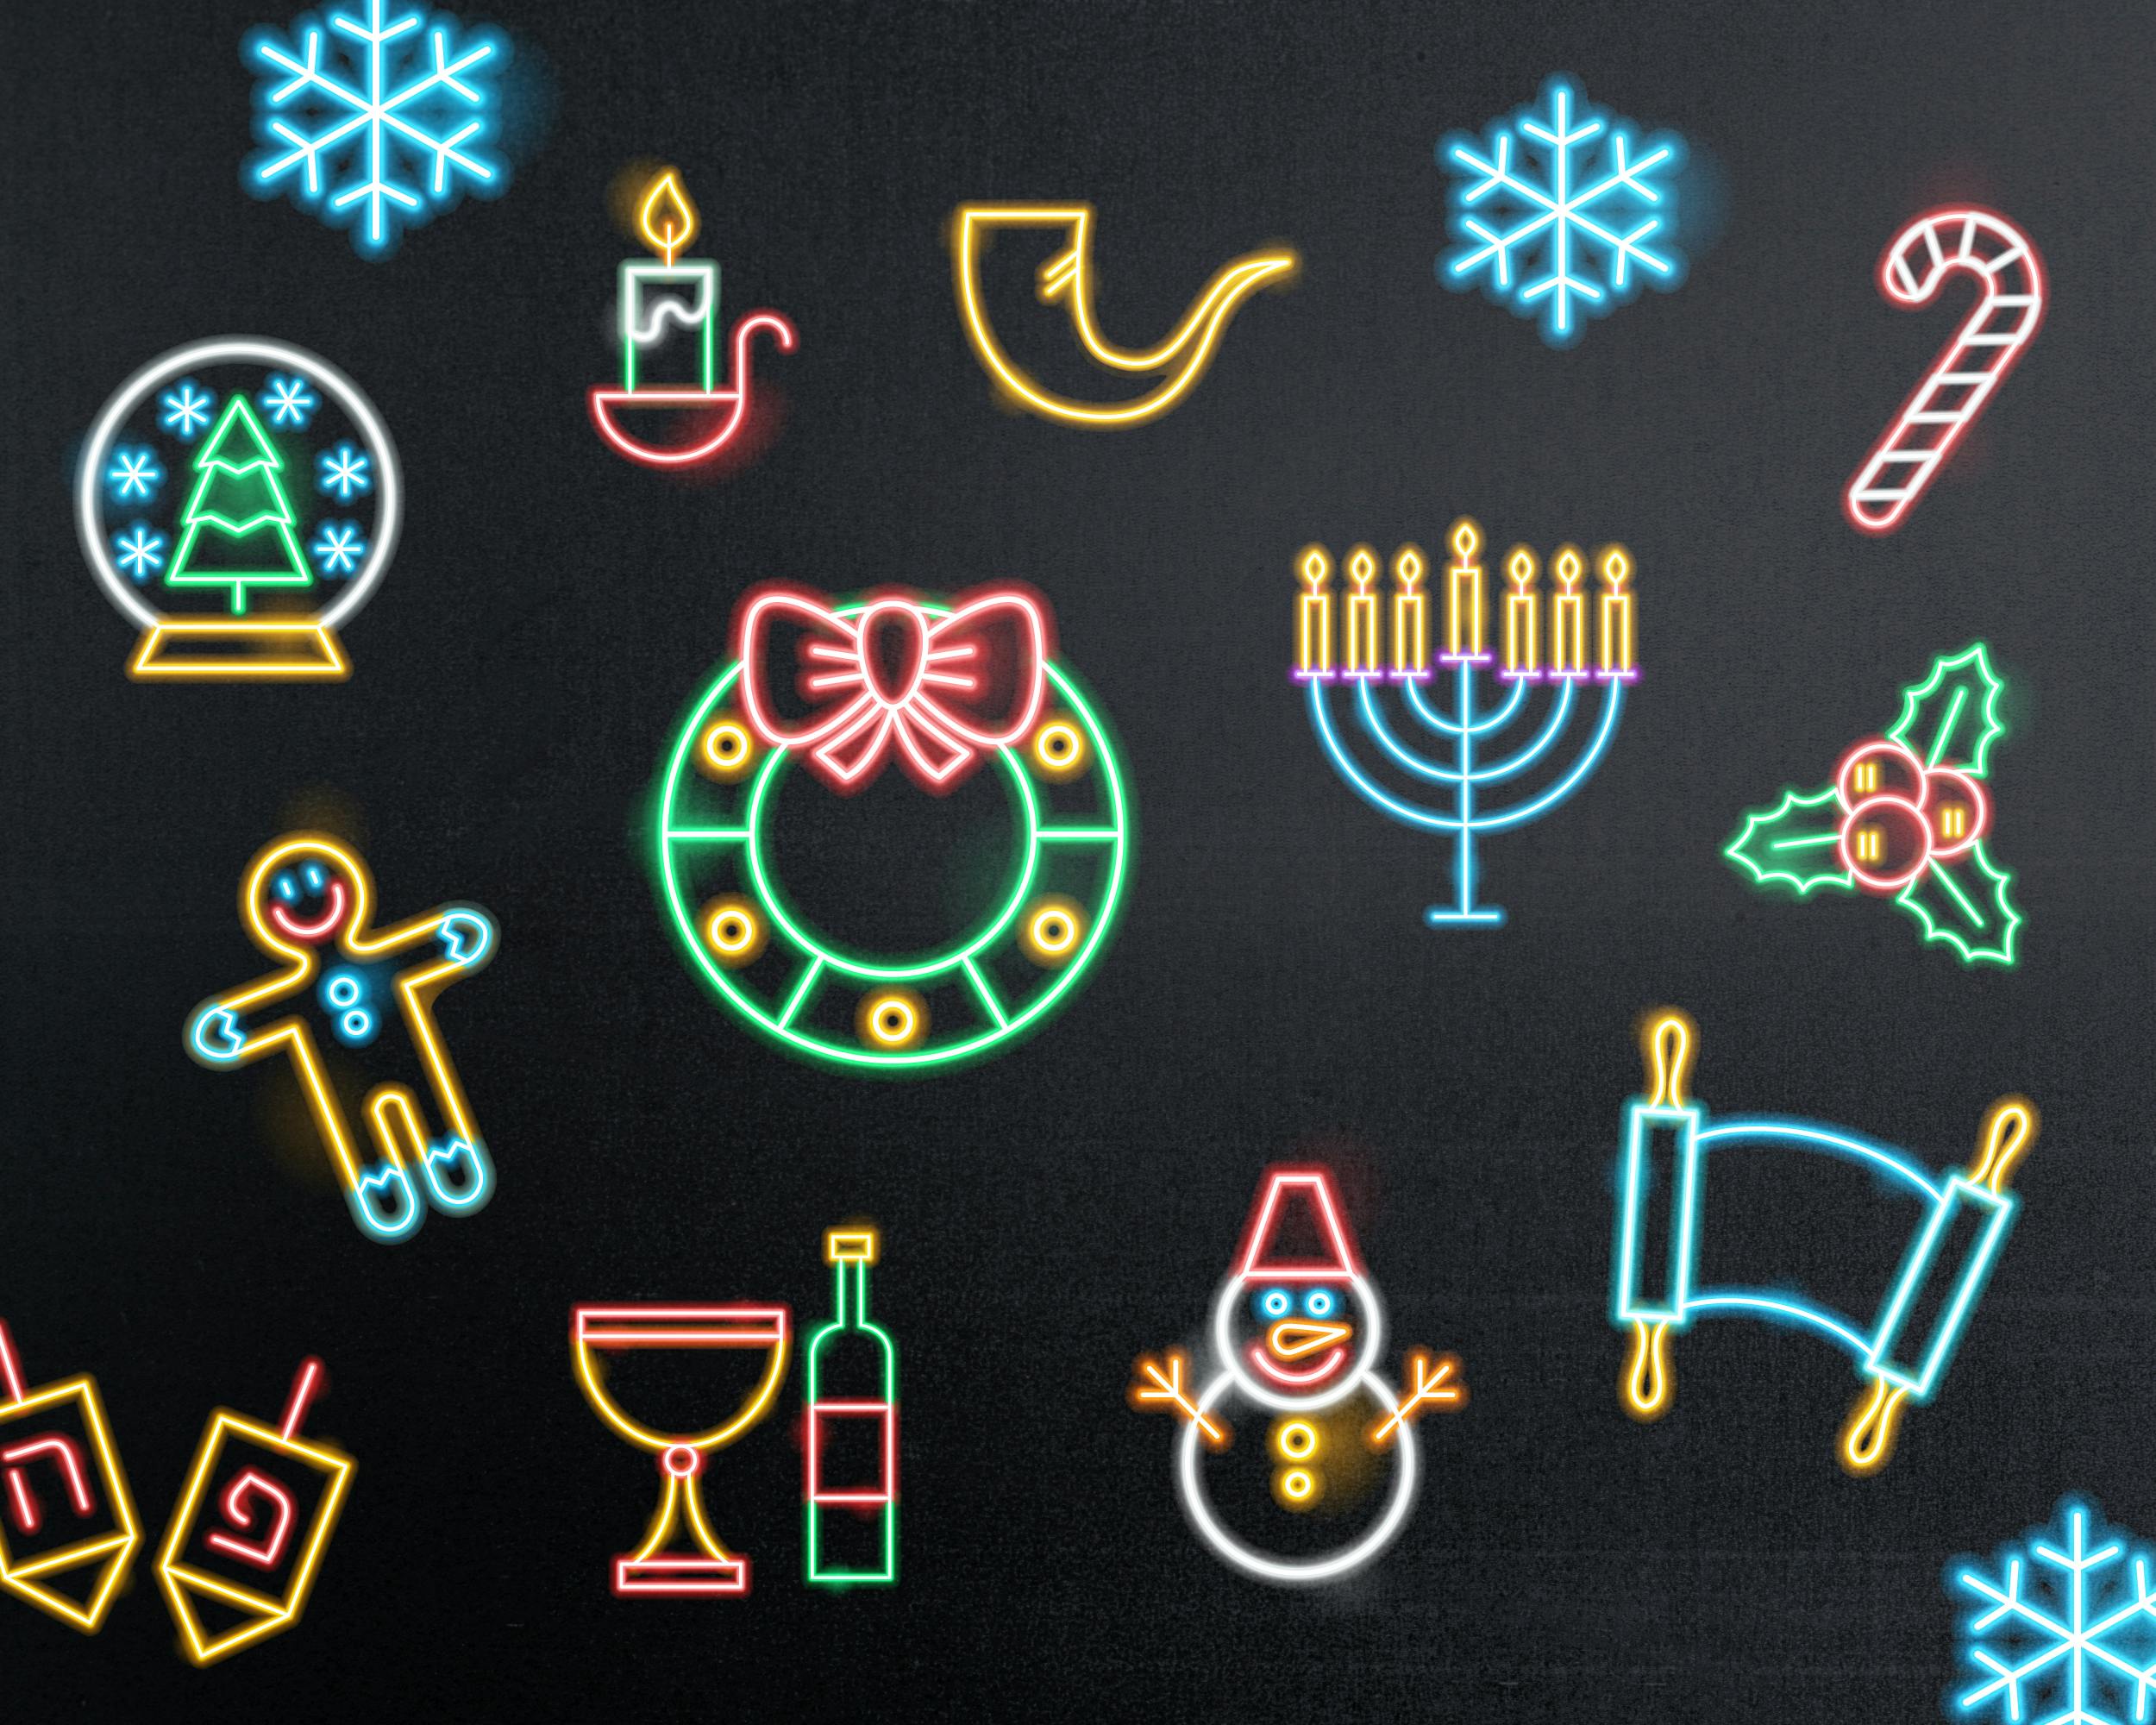 Some neon-lit holiday images dot a black background.